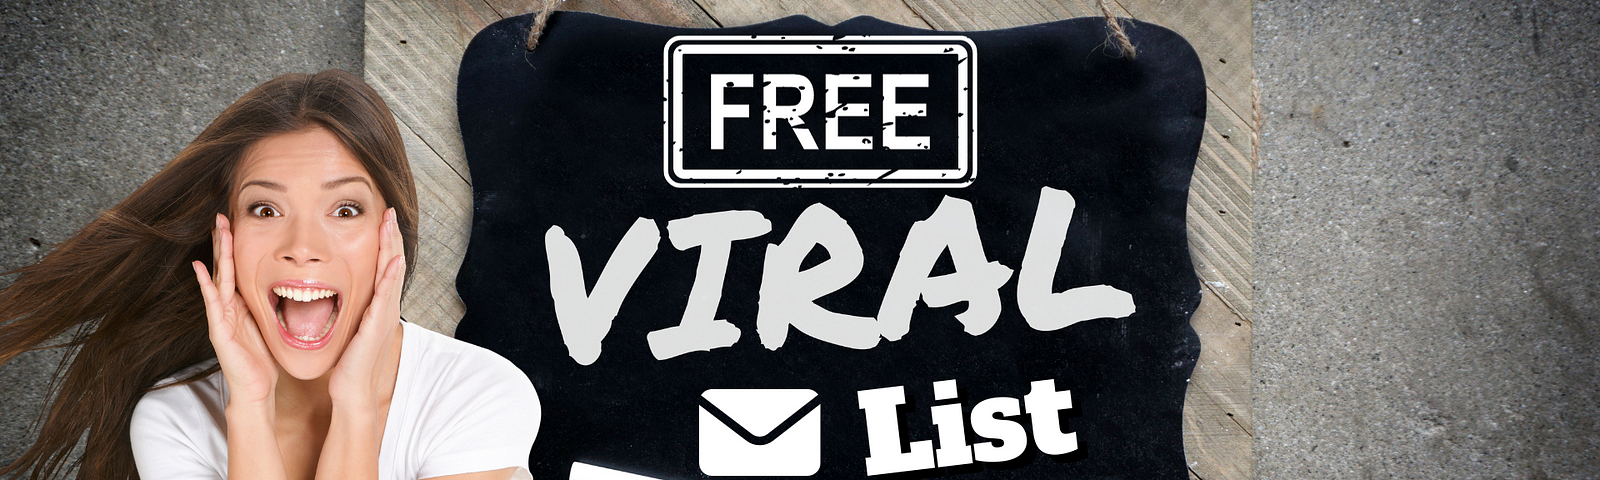 Conventional Email Marketing And Viral List Building Benefits